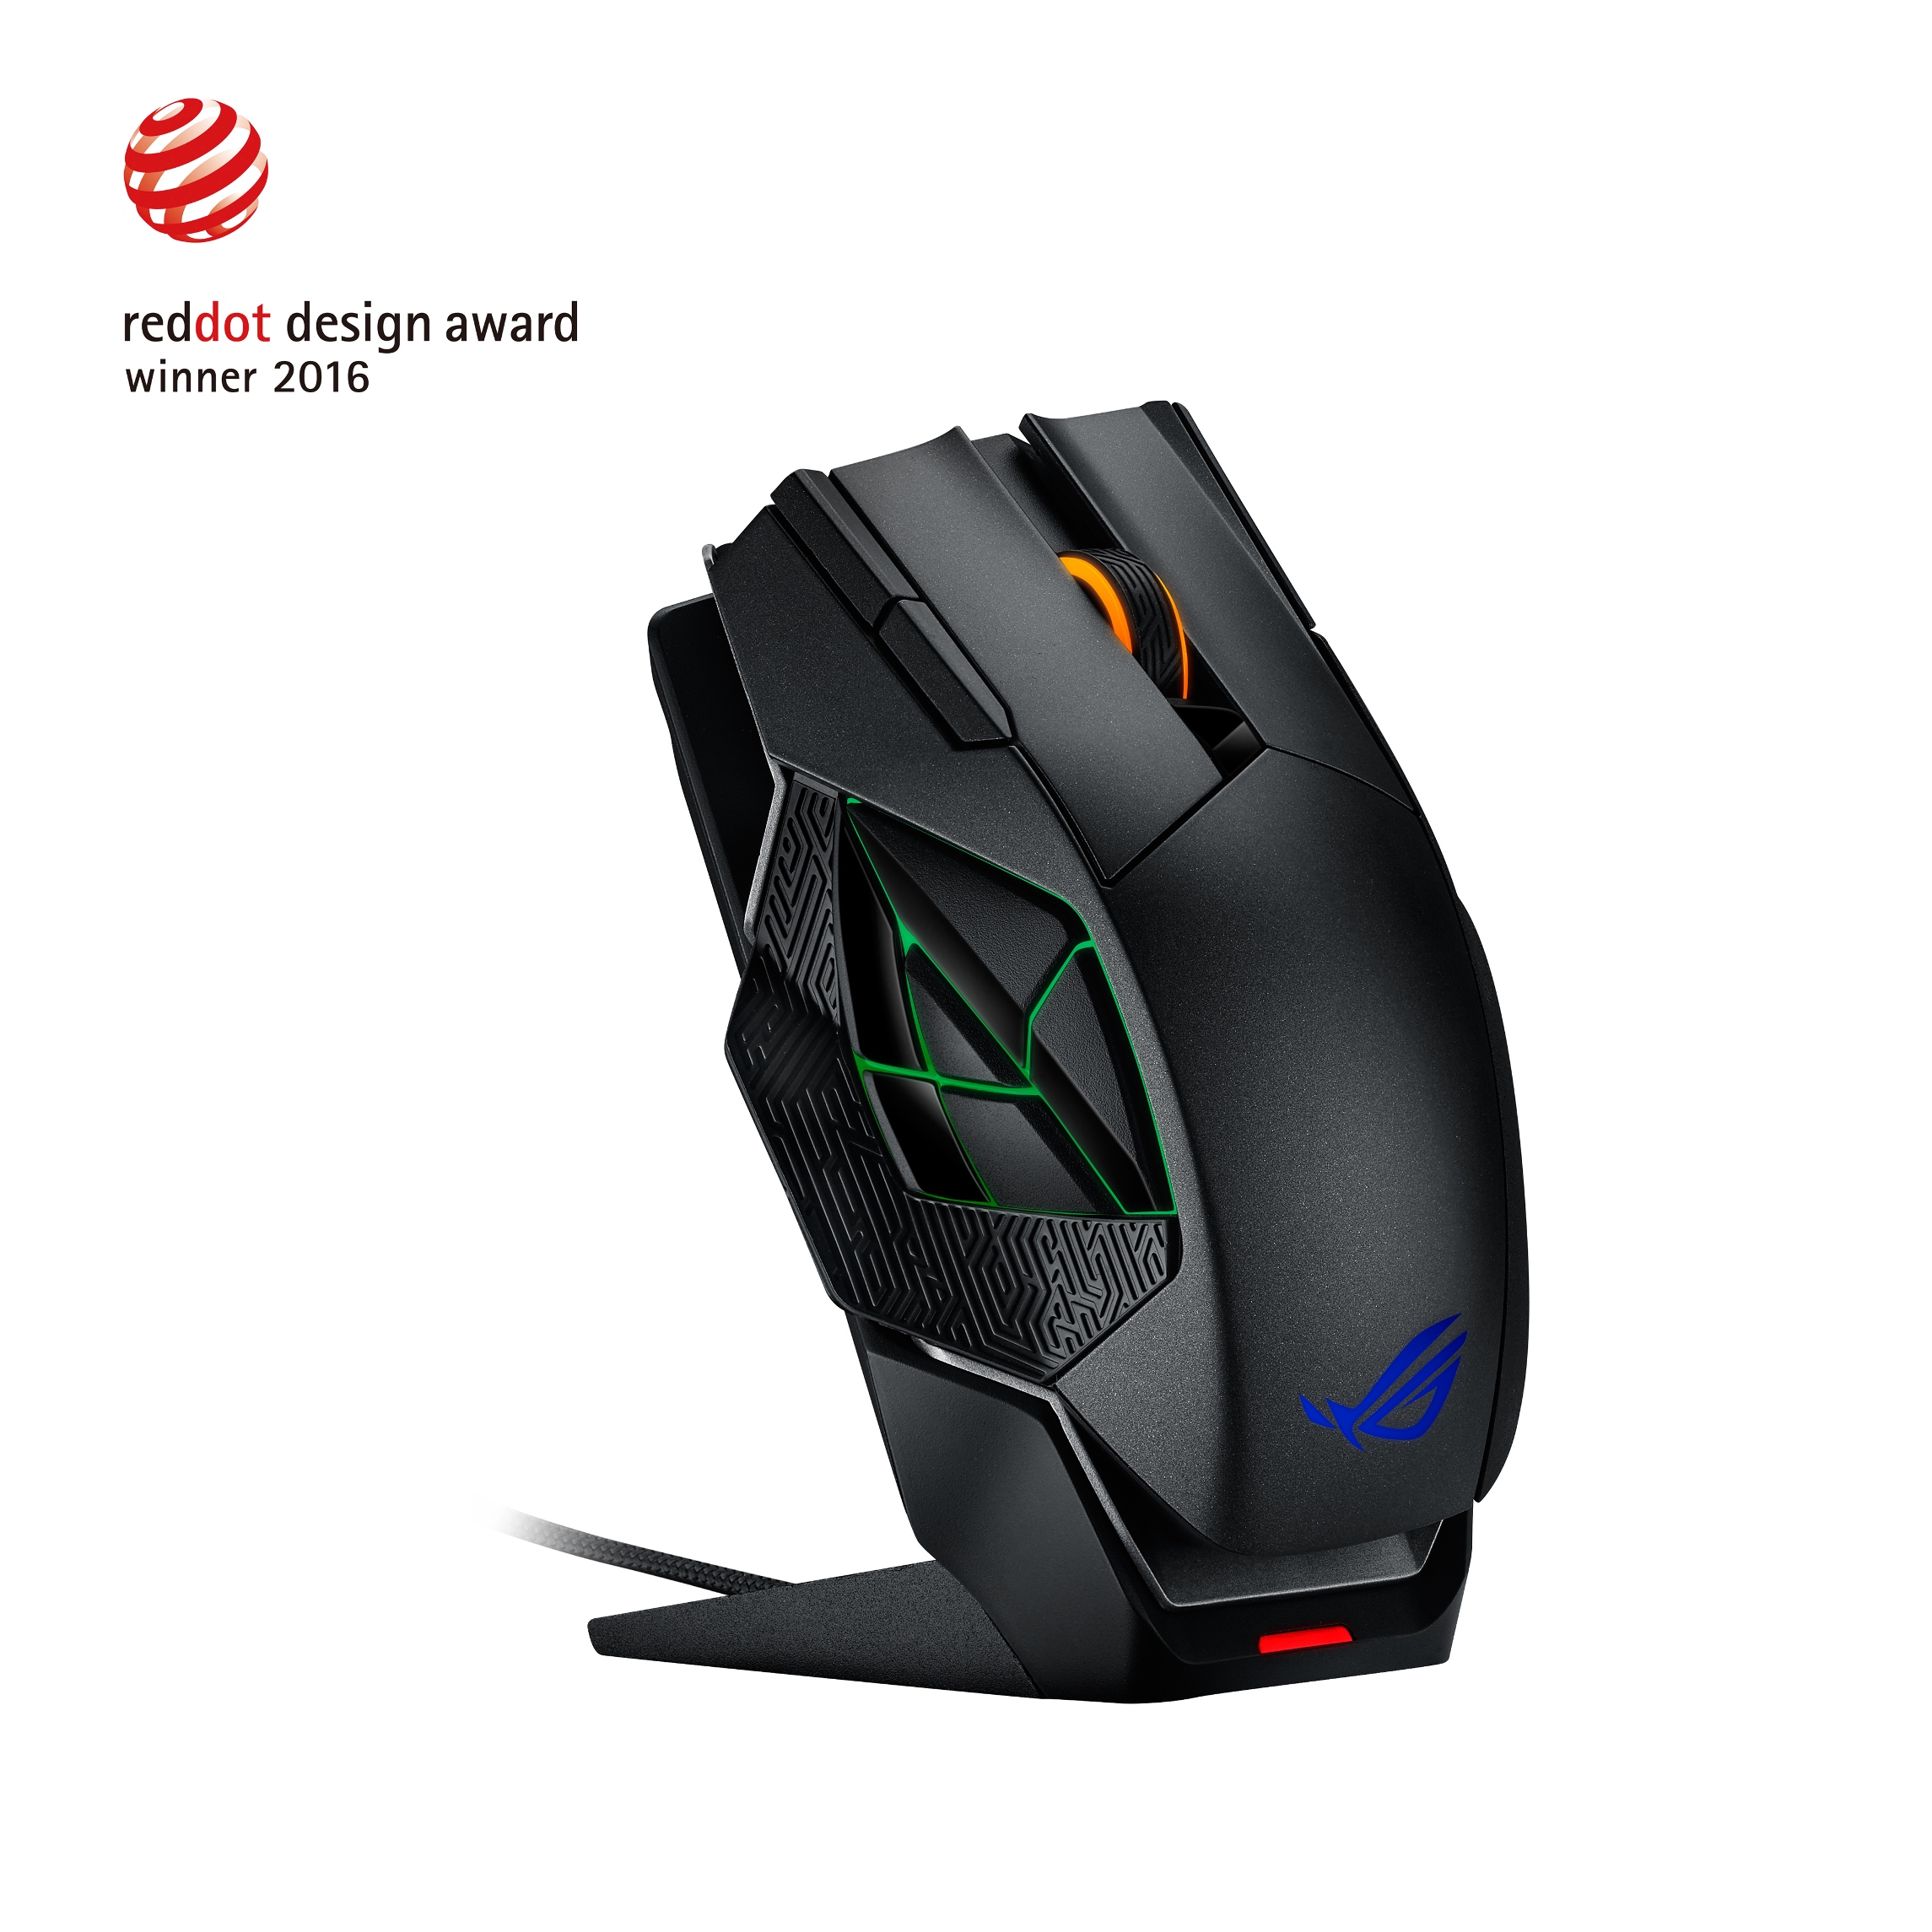 ASUS ROG Spatha MMO-focused gaming mouse has 12 programmable buttons